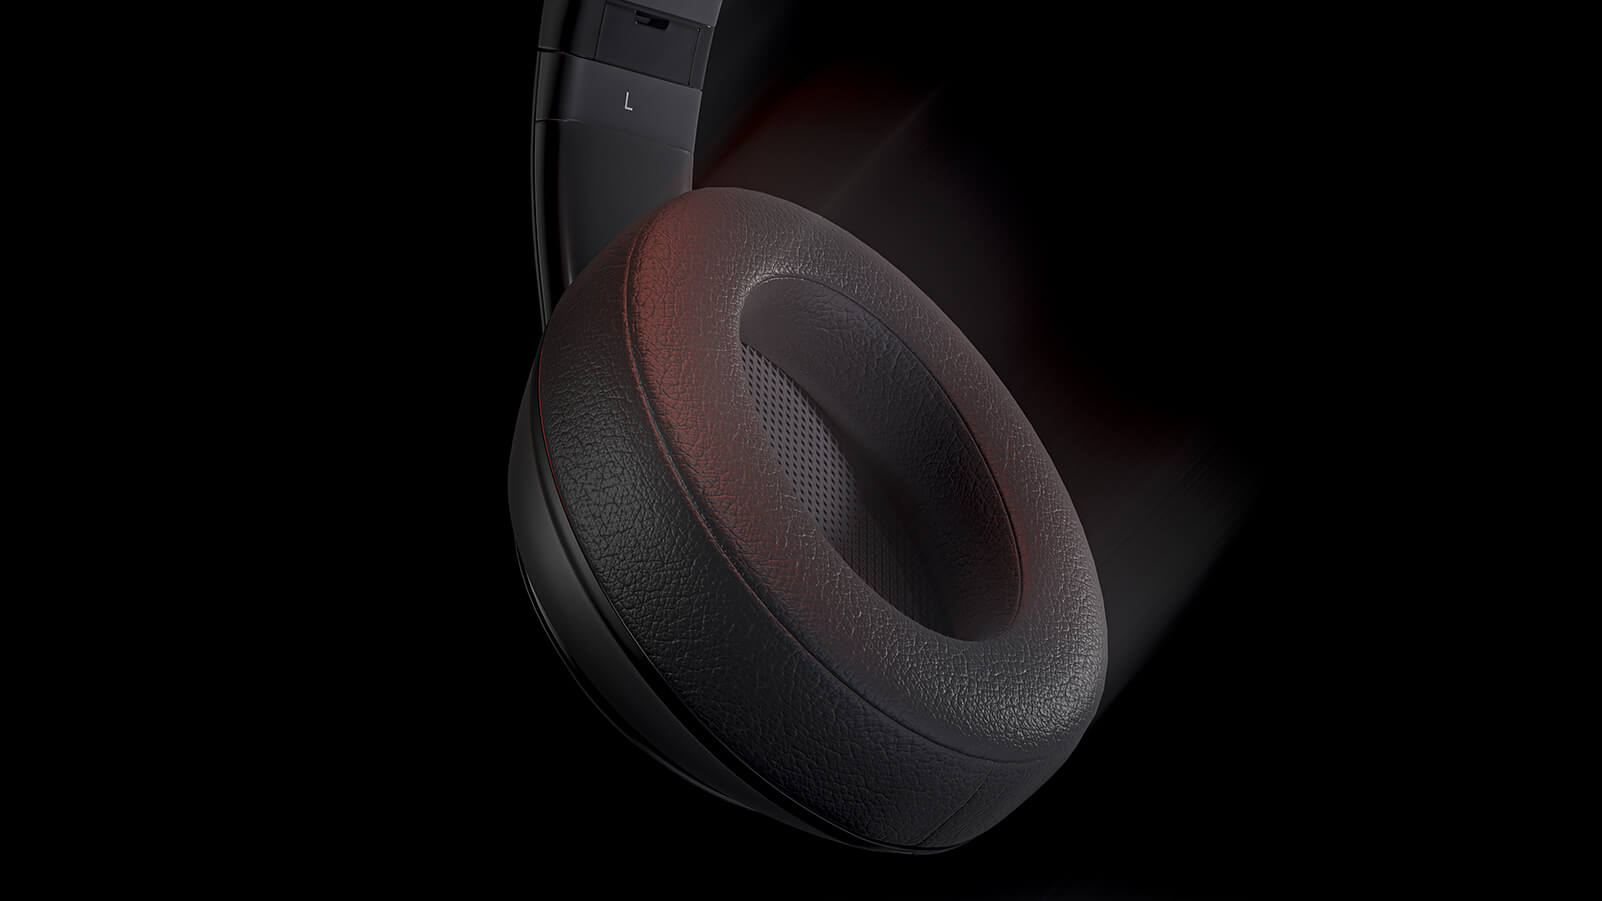 Beats Solo Pro Headphones CGI Created In Unreal Engine 5, rendered with Lumen + Raytracing + Photoshop. By Lee Powers a Multidisciplinary Creative Based in Singapore